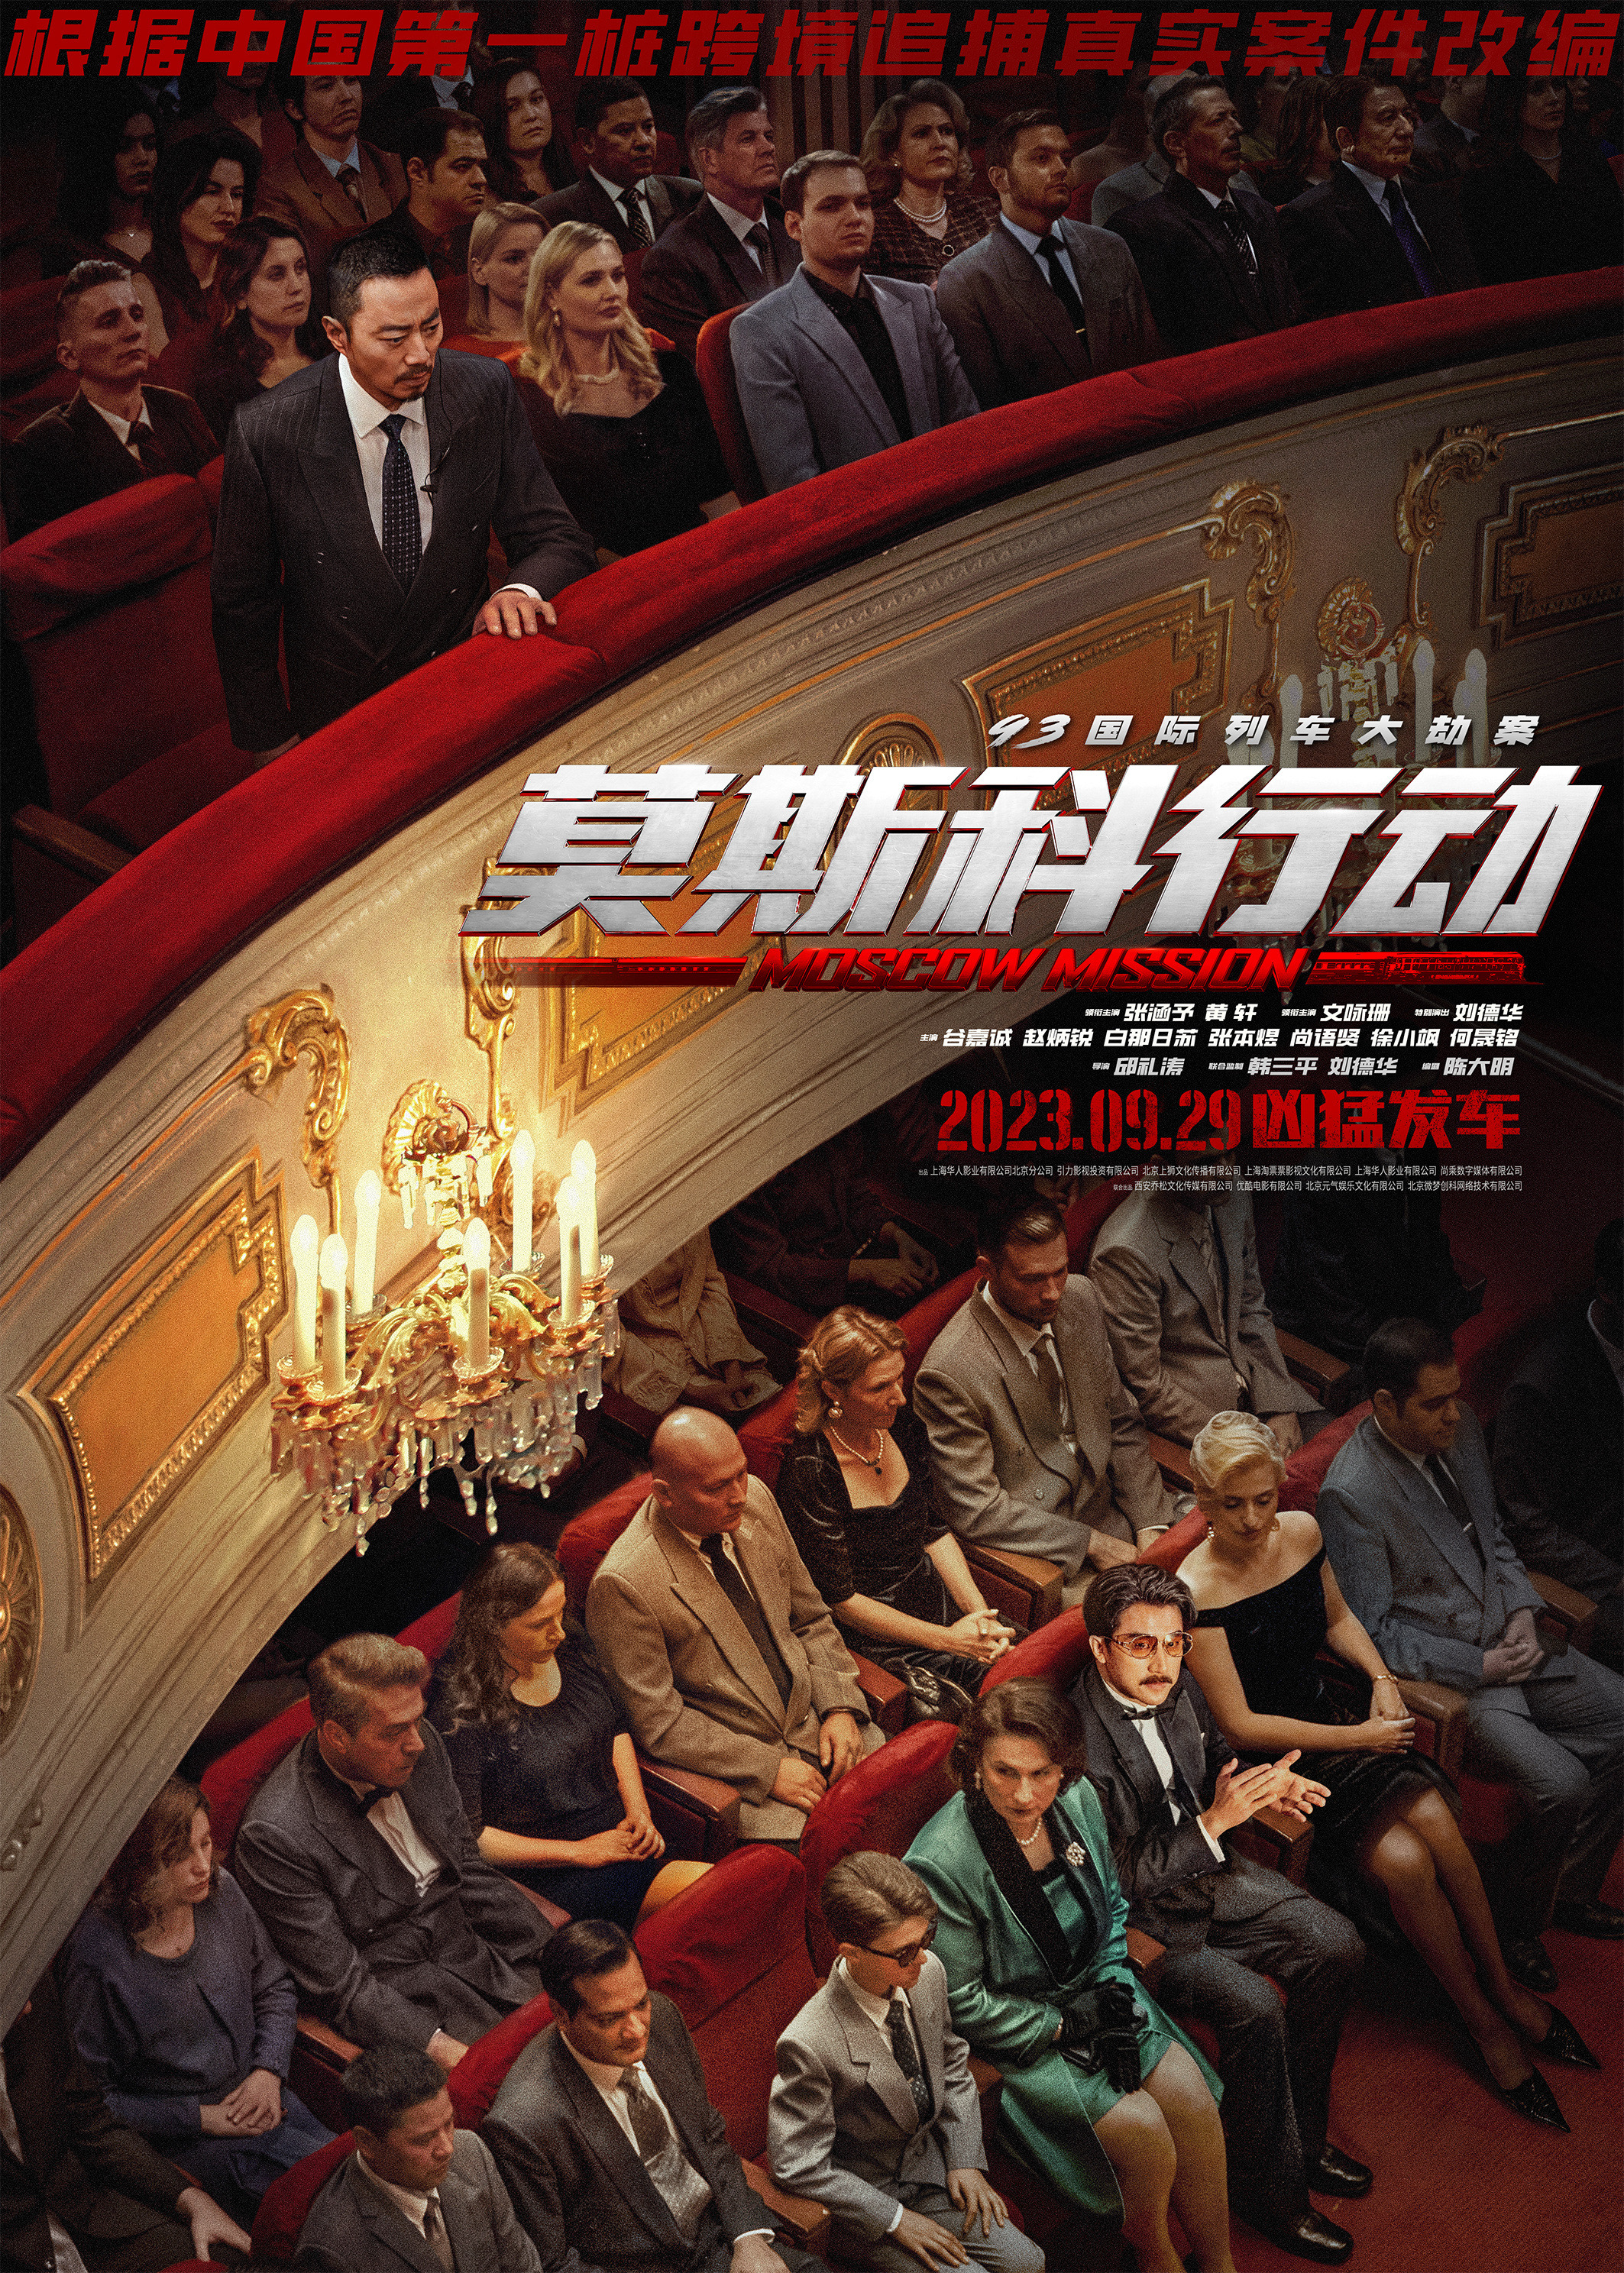 Mega Sized Movie Poster Image for Mosike xingdong (#8 of 8)